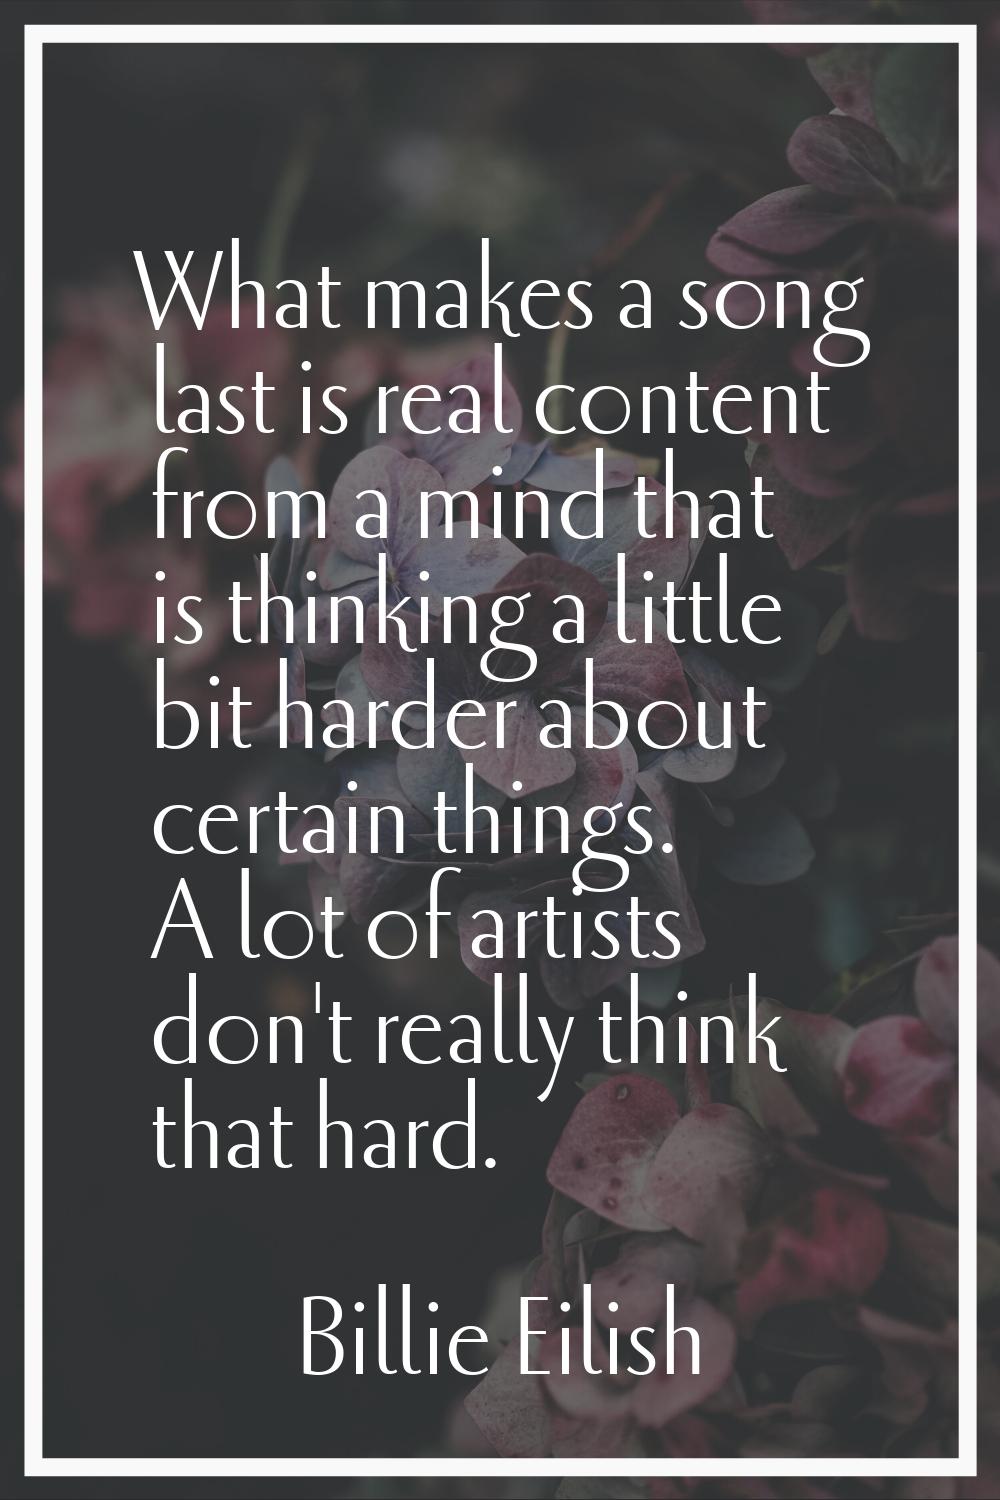 What makes a song last is real content from a mind that is thinking a little bit harder about certa